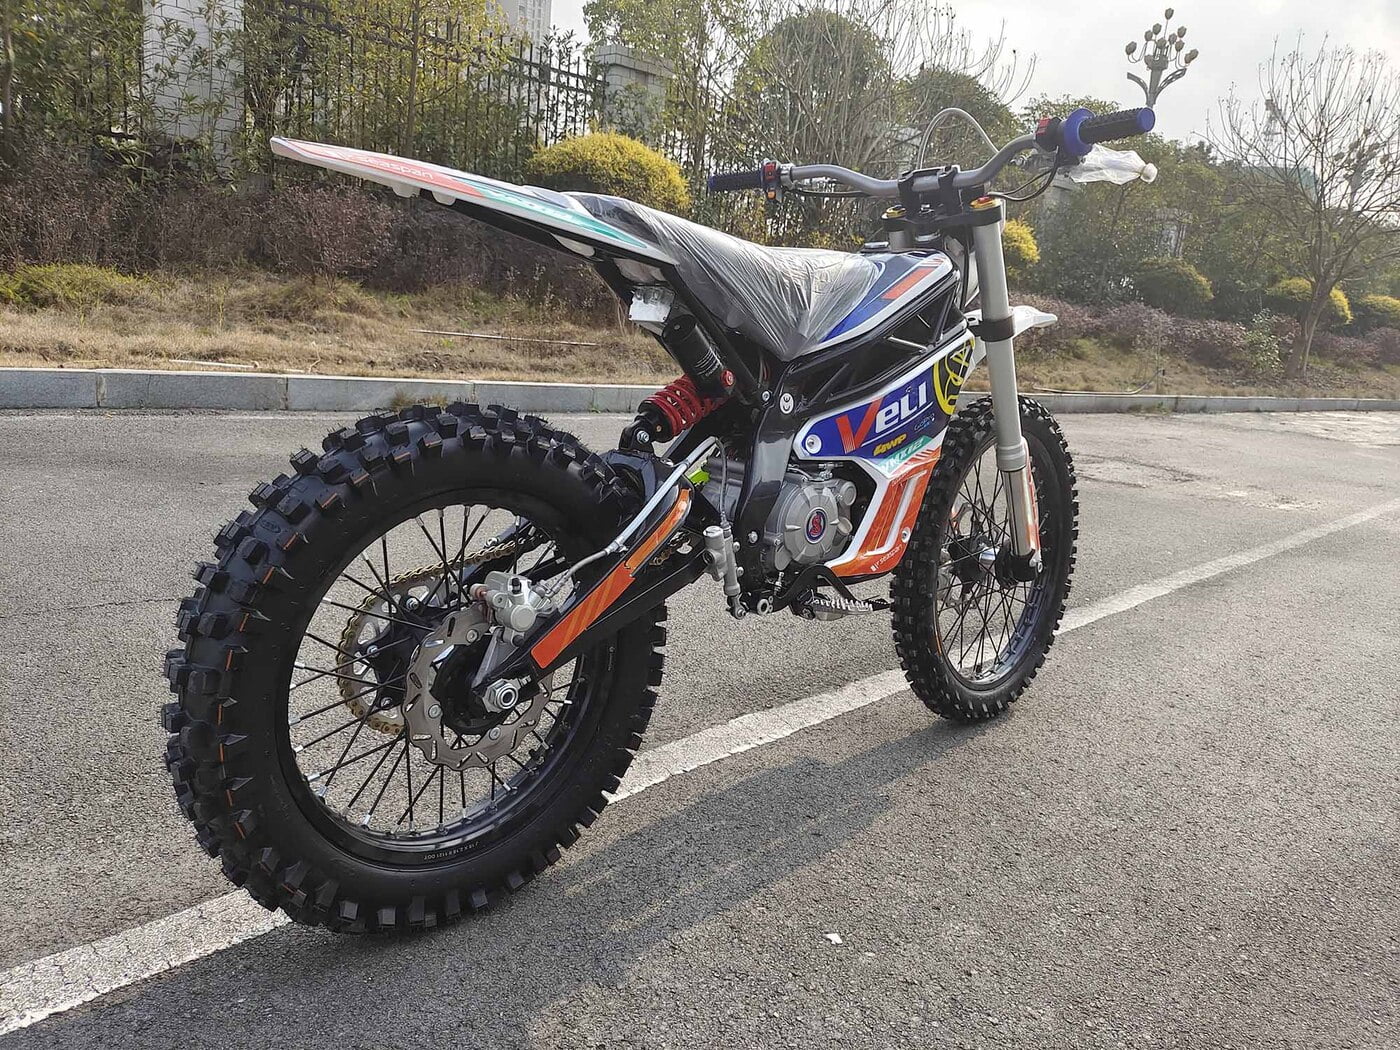 VMX12 Off Road Electric Motorcycle, E-Moto